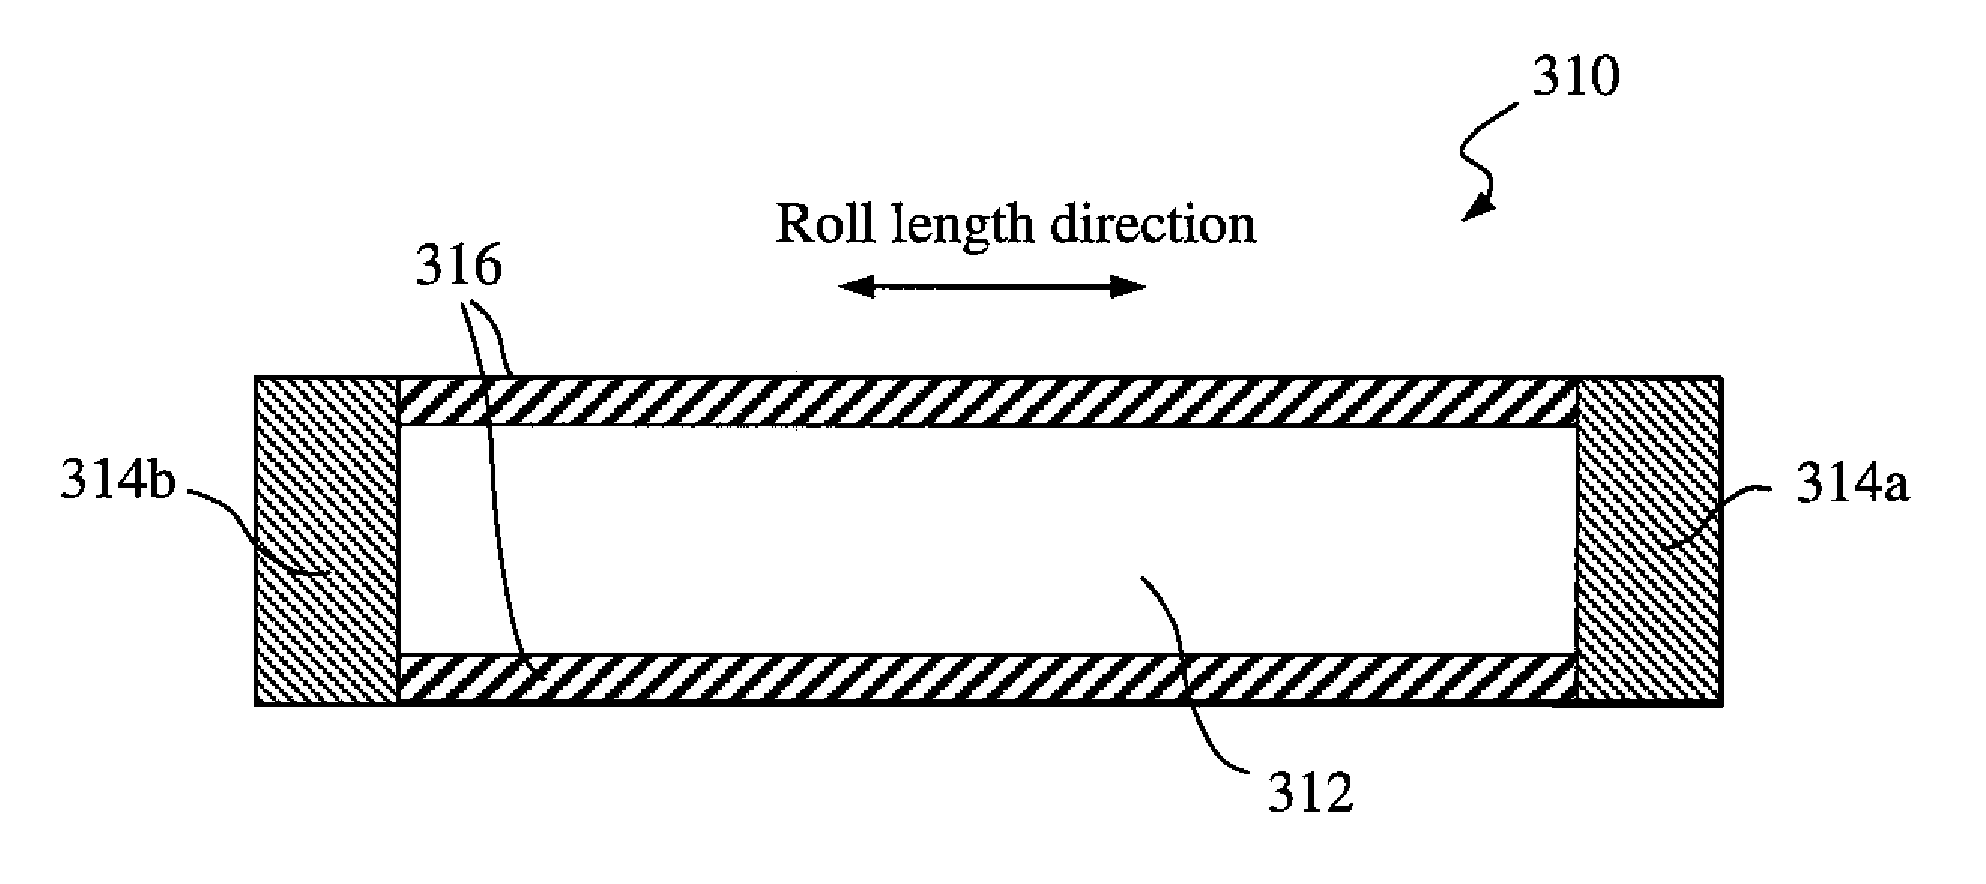 Optical film composite having spatially controlled adhesive strength